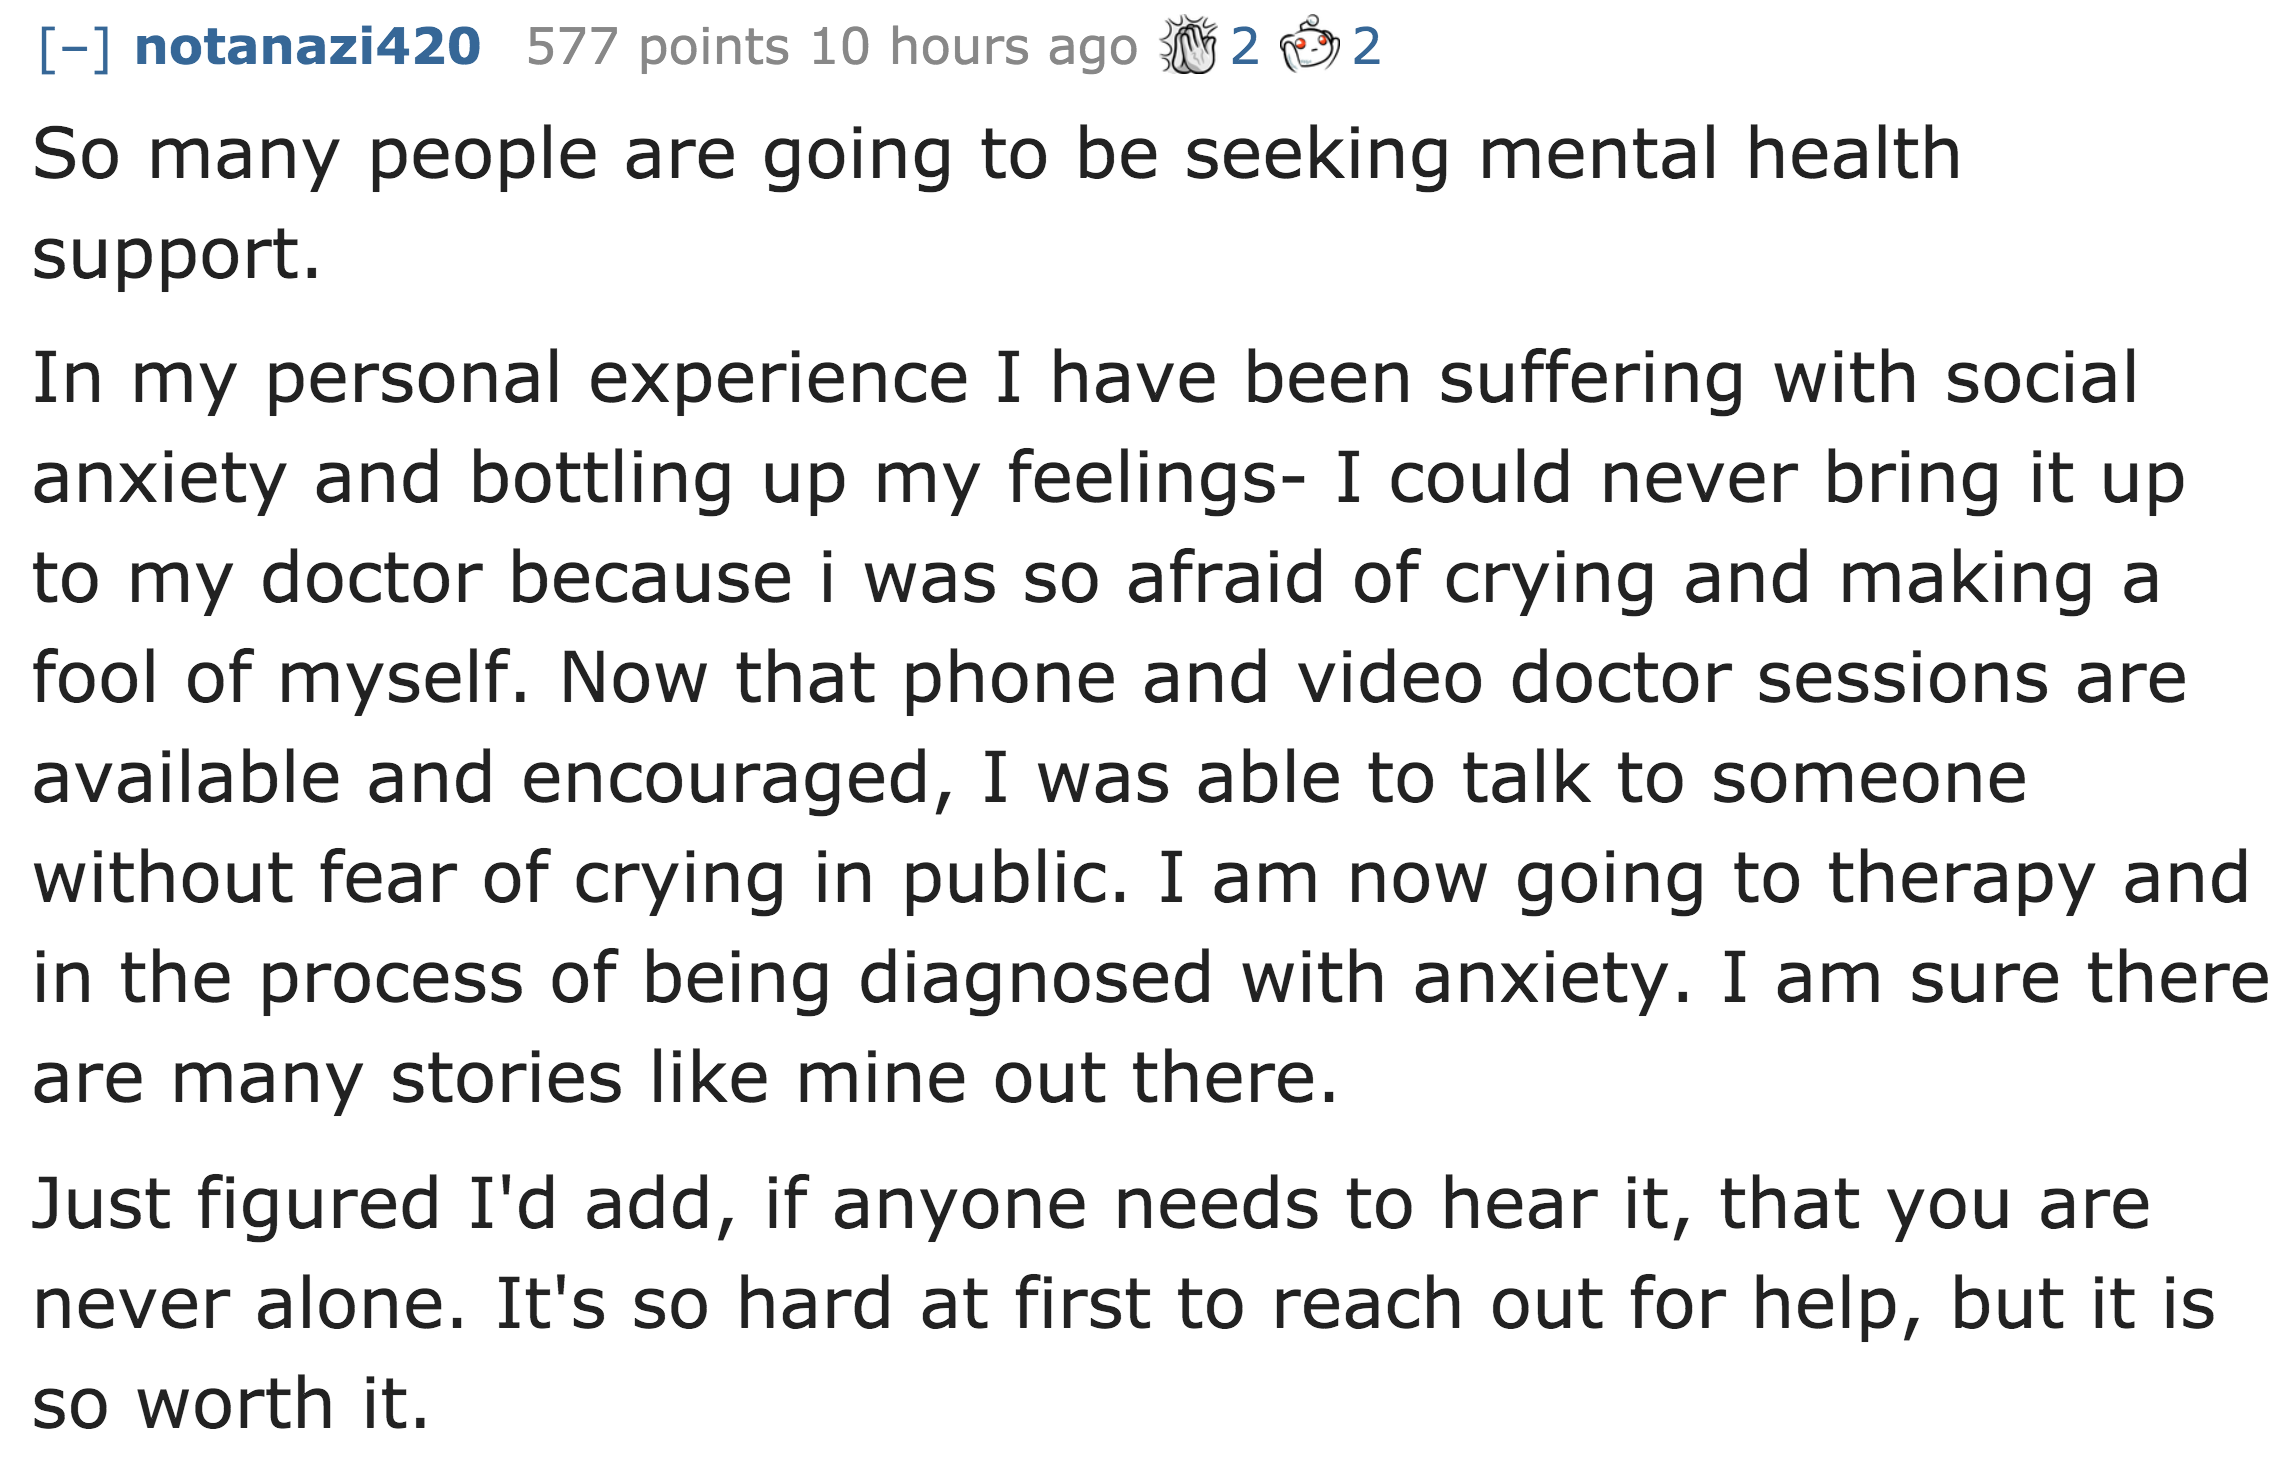 So many people are going to be seeking mental health support. In my personal experience I have been suffering with social anxiety and bottling up my feelings I could never bring it up to my doc